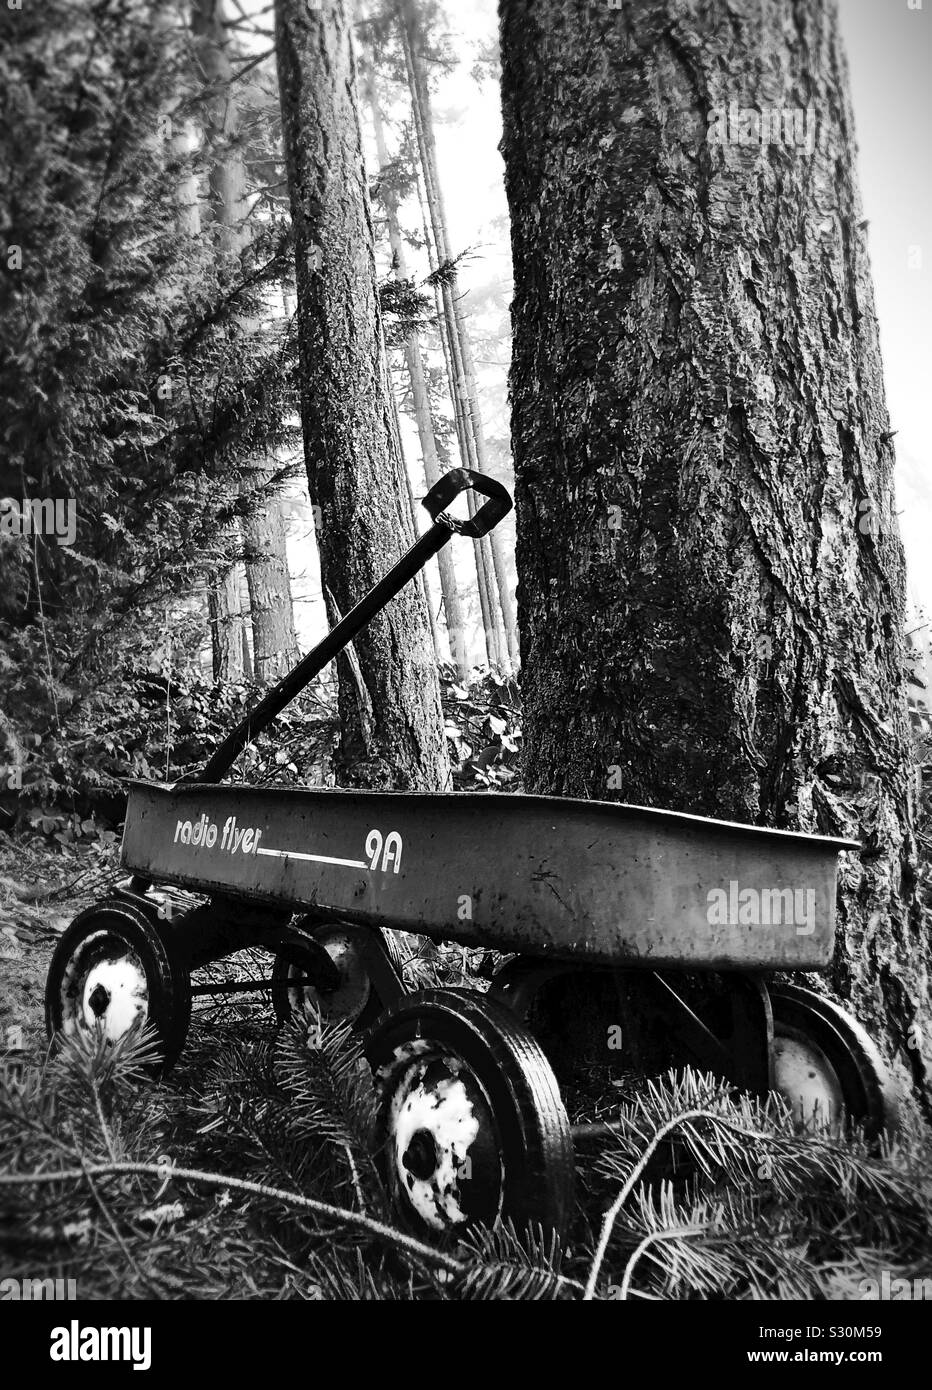 An old radio flyer wagon next to a tree in a forest. Stock Photo